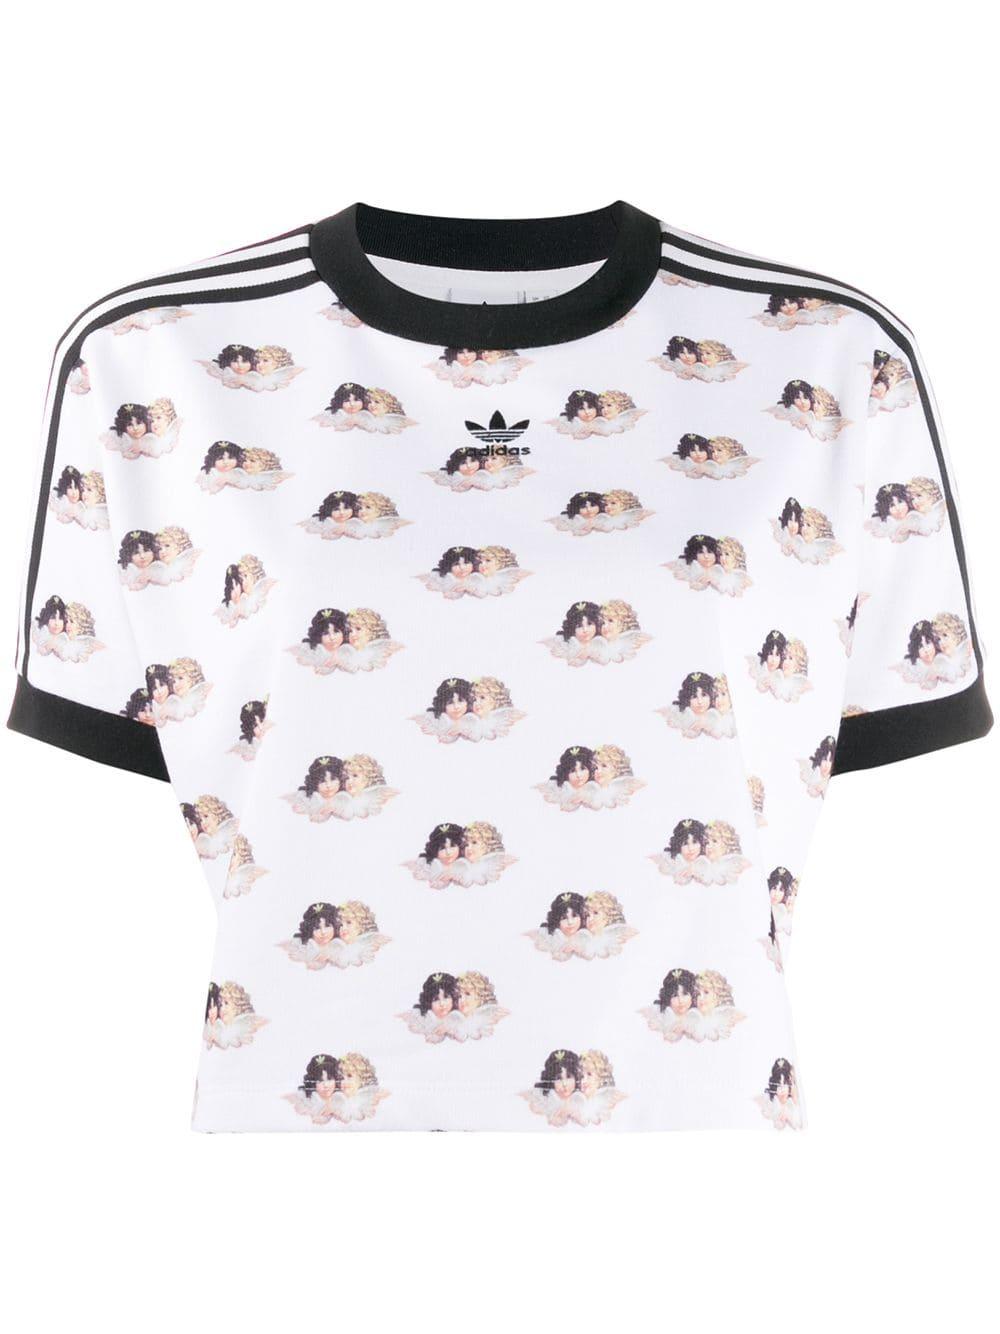 Fiorucci X Adidas All Over Angels T-shirt in White | Lyst